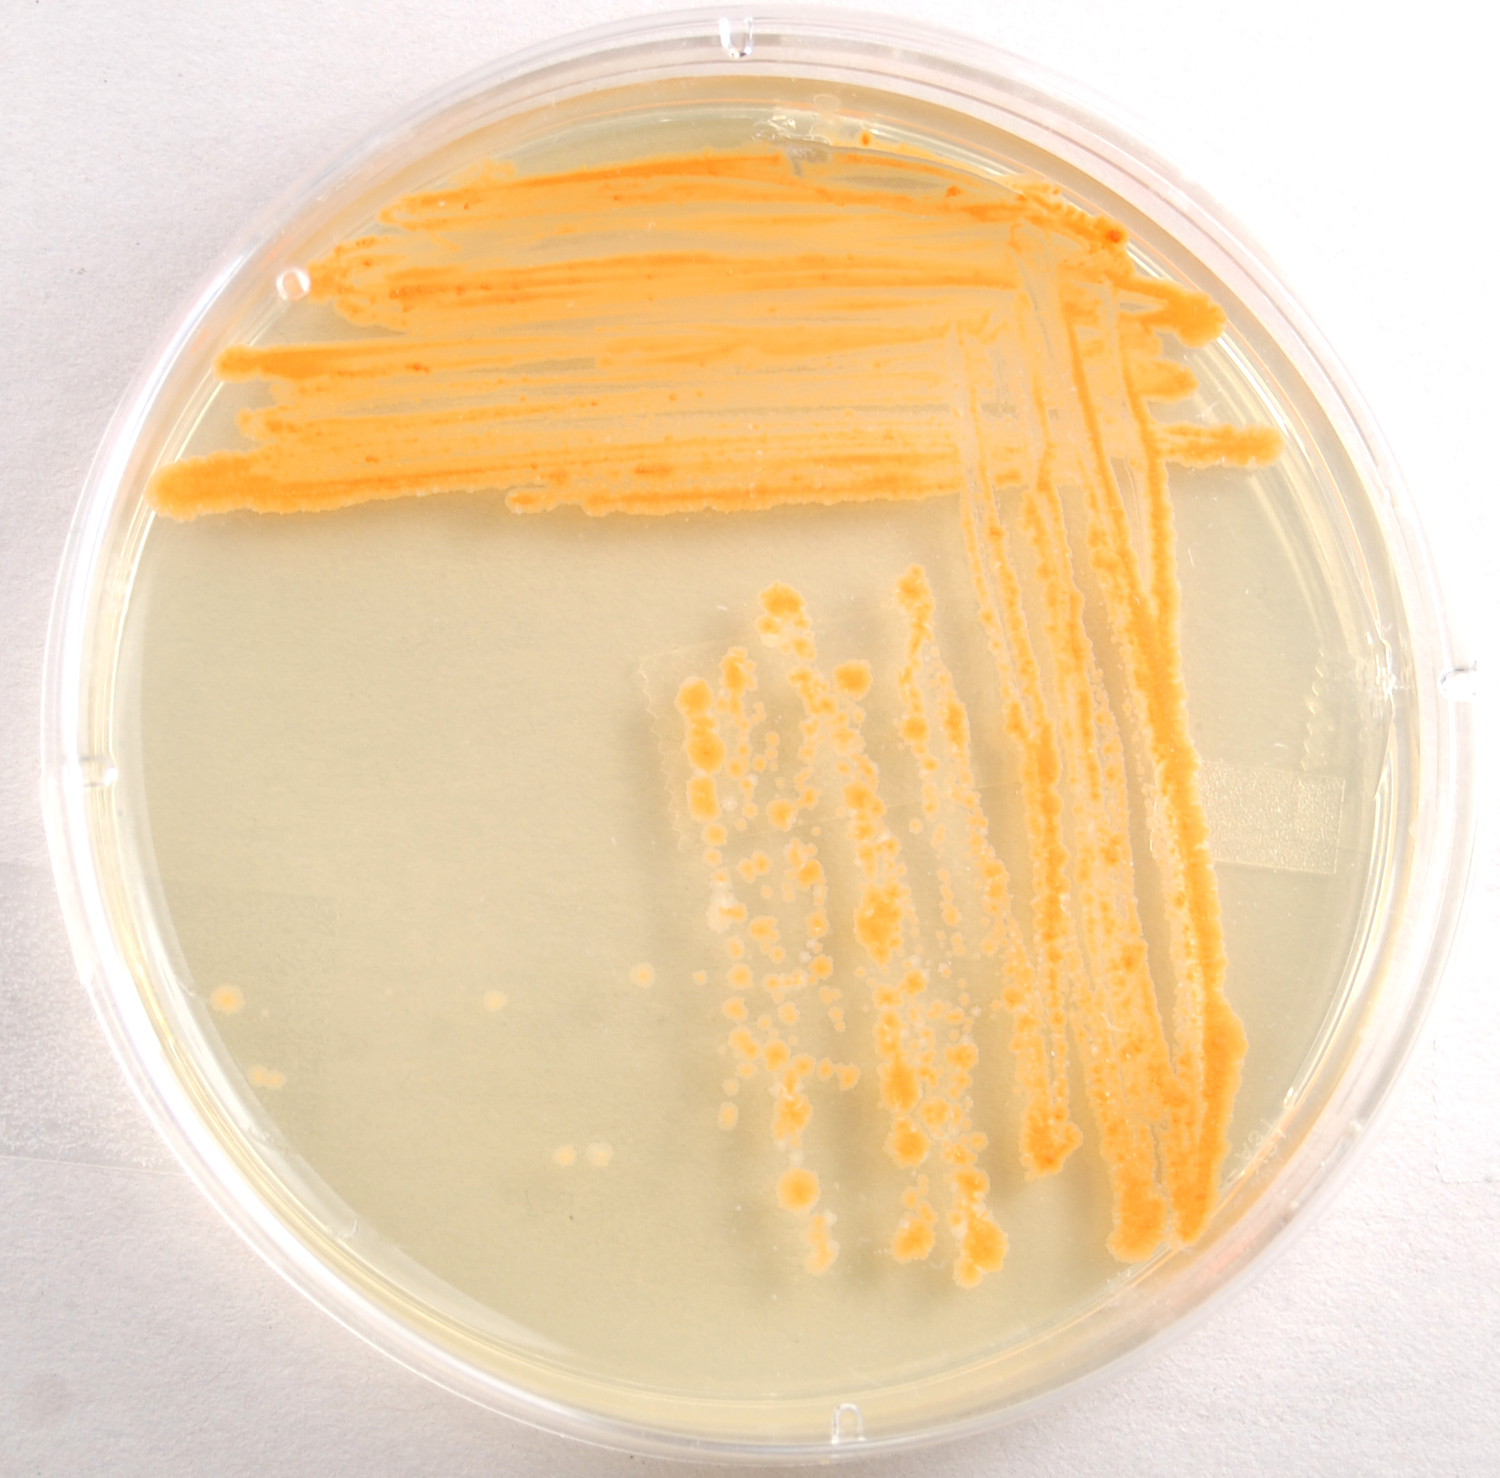 Photograph of a TSA plate culture of <i>Mycobacterium phlei</i> showing its orange, water insoluble pigment.